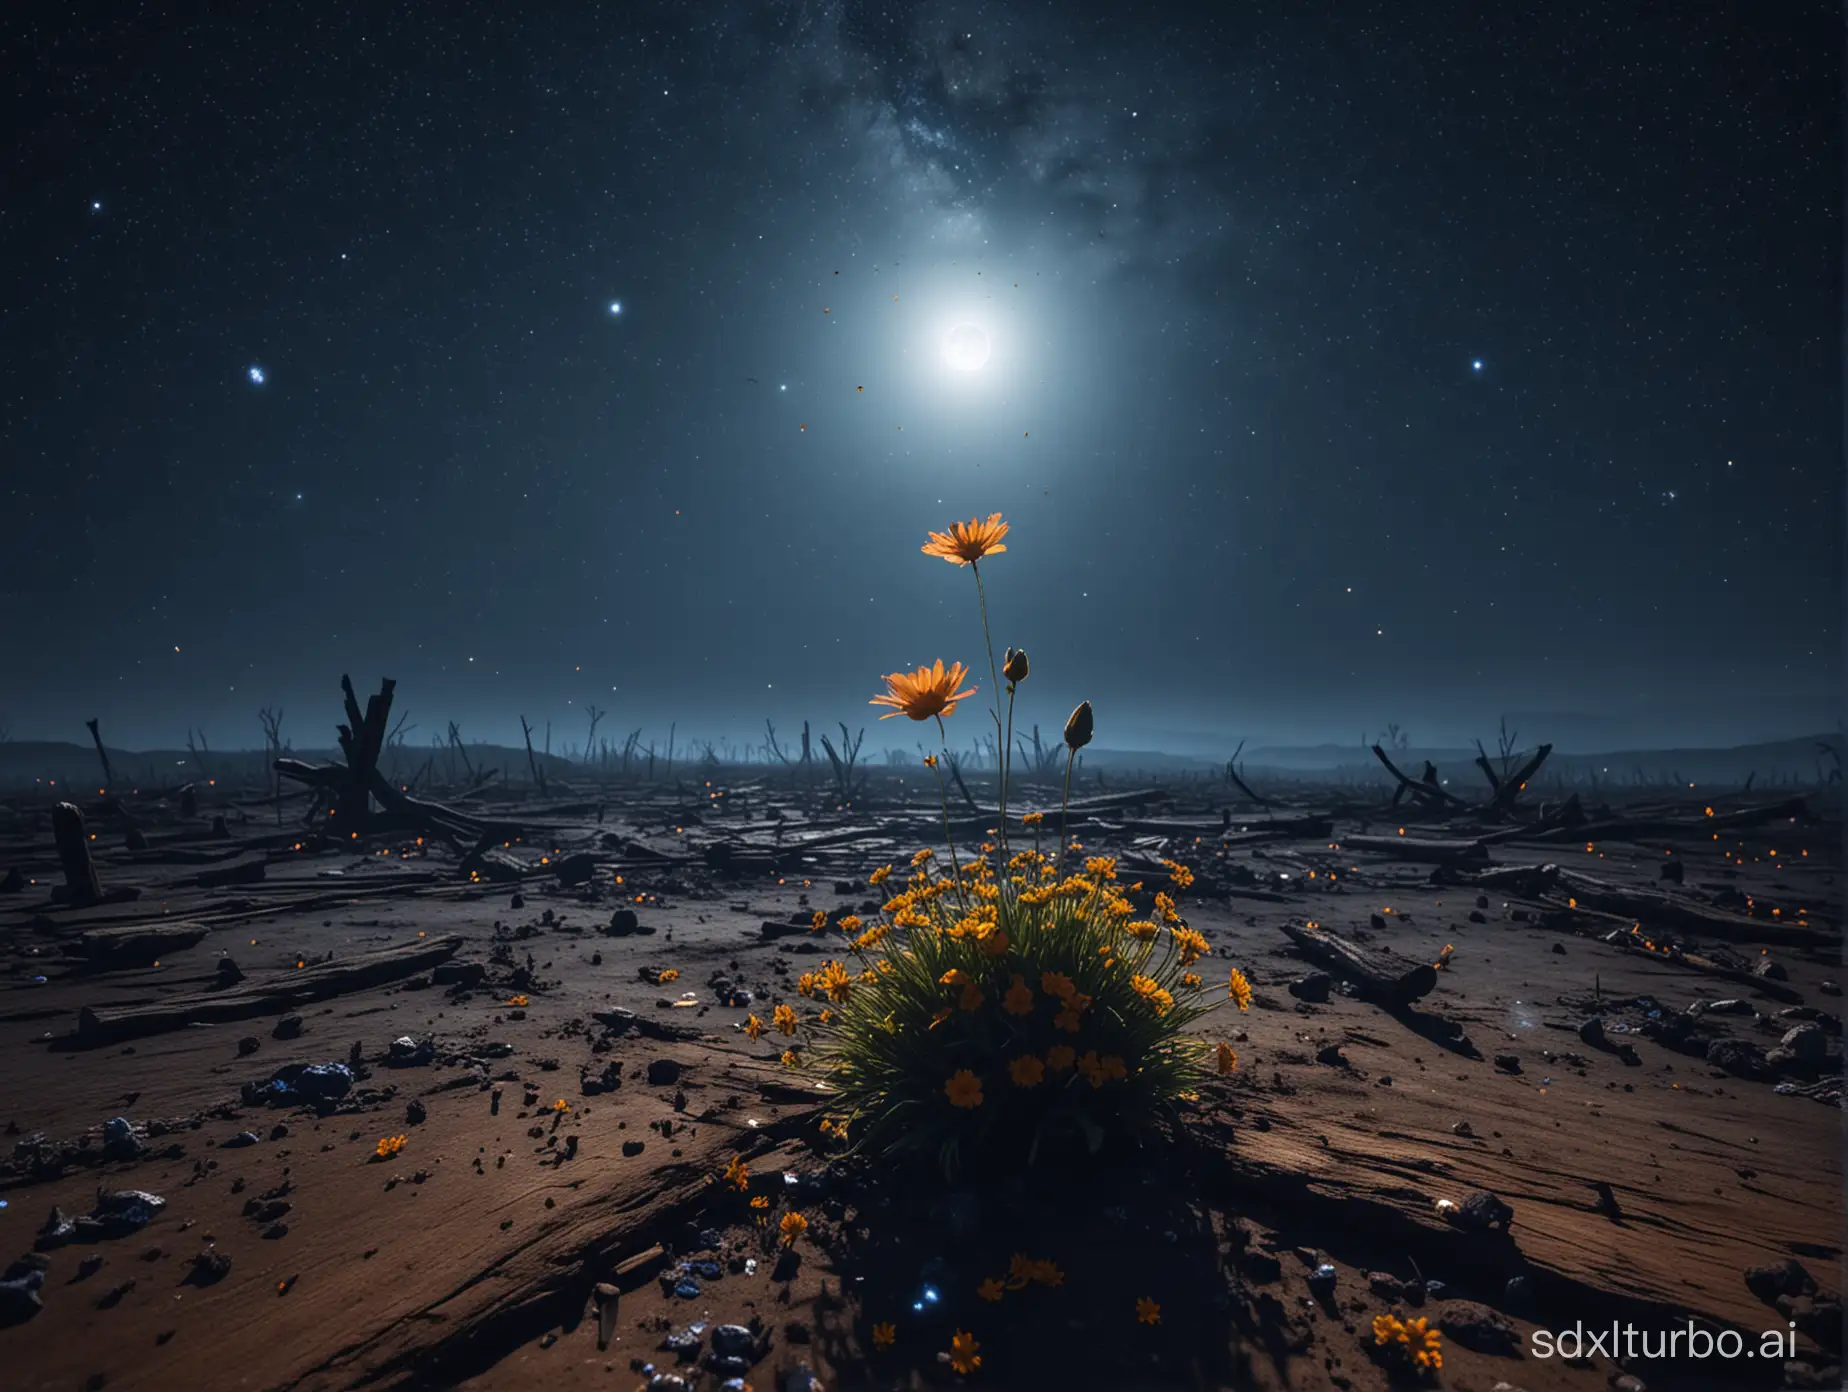 Aftermath-of-Battle-Night-Sky-with-Floating-Flower